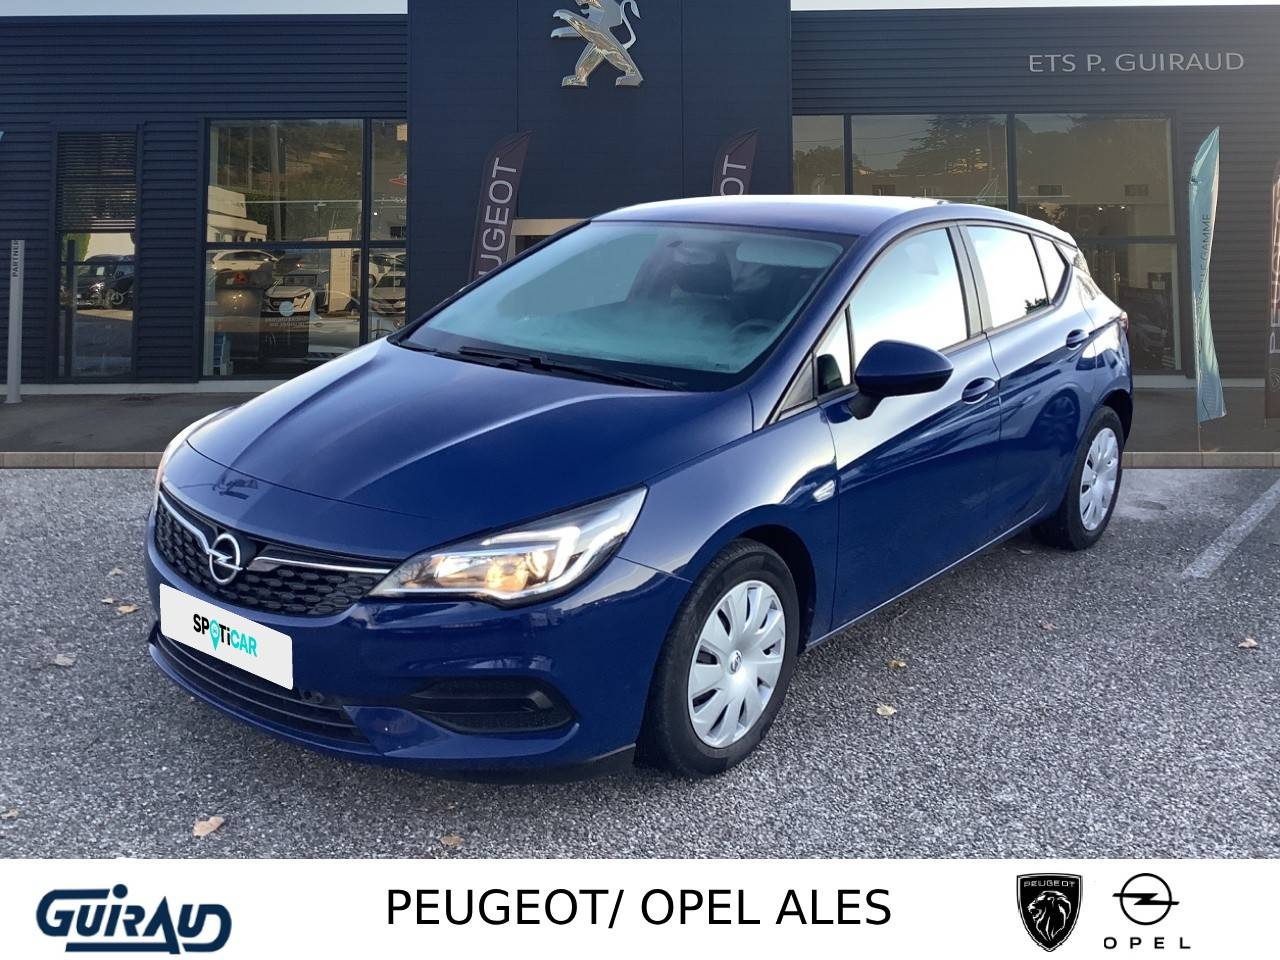 OPEL ASTRA | Astra 1.5 Diesel 105 ch BVM6 occasion - Peugeot Alès